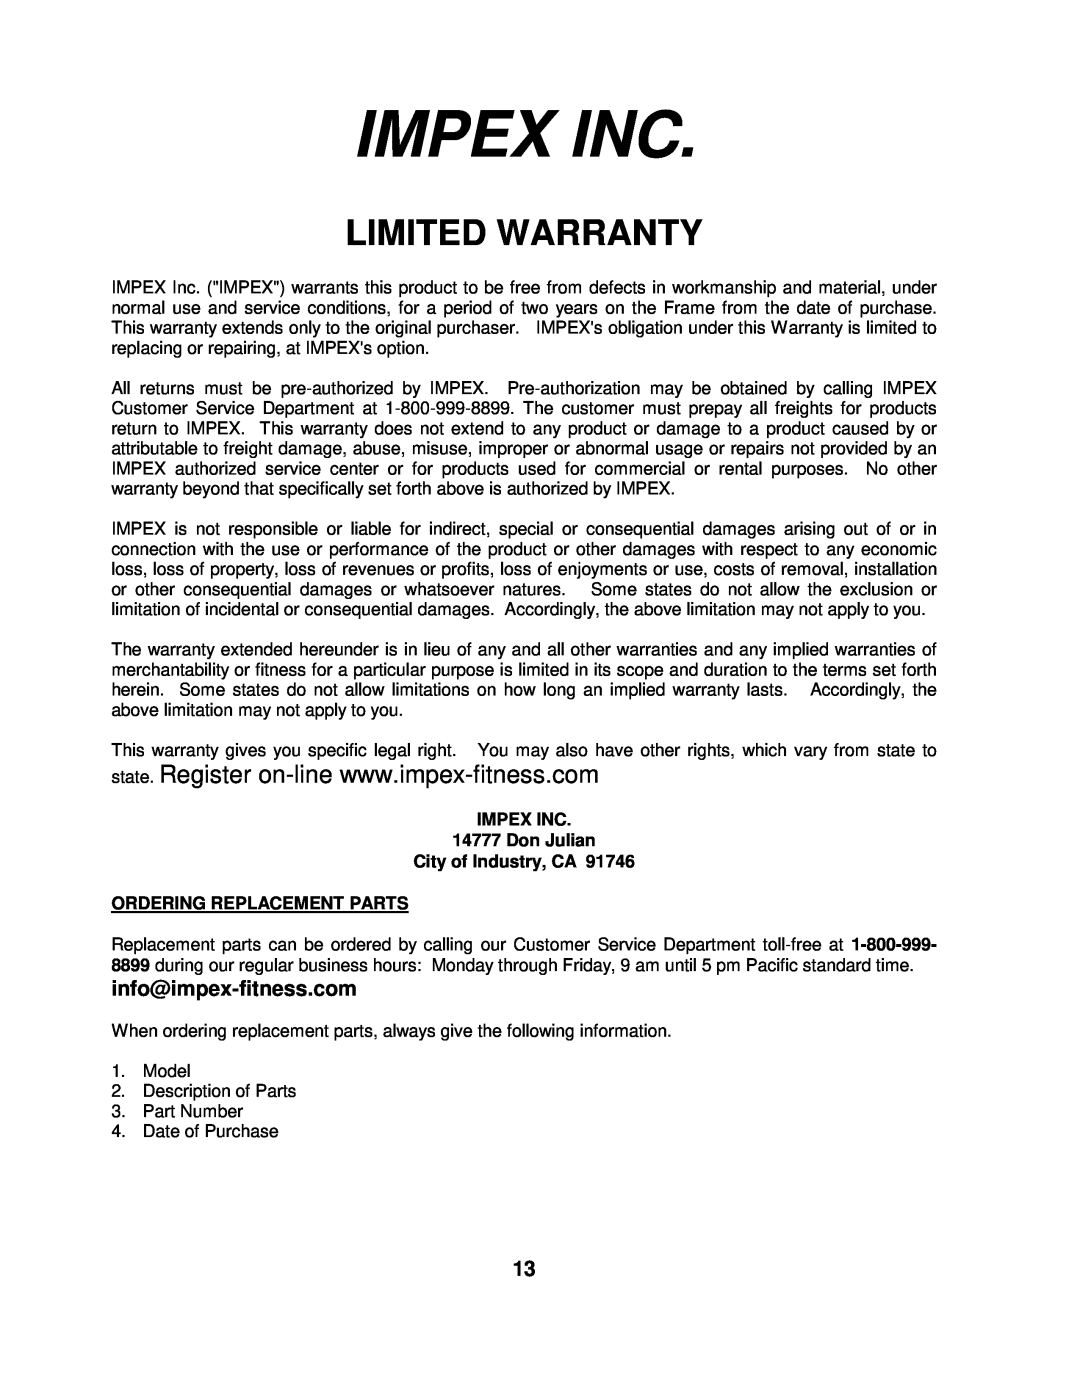 Impex MS-60 manual Impex Inc, Limited Warranty, IMPEX INC 14777 Don Julian City of Industry, CA, Ordering Replacement Parts 